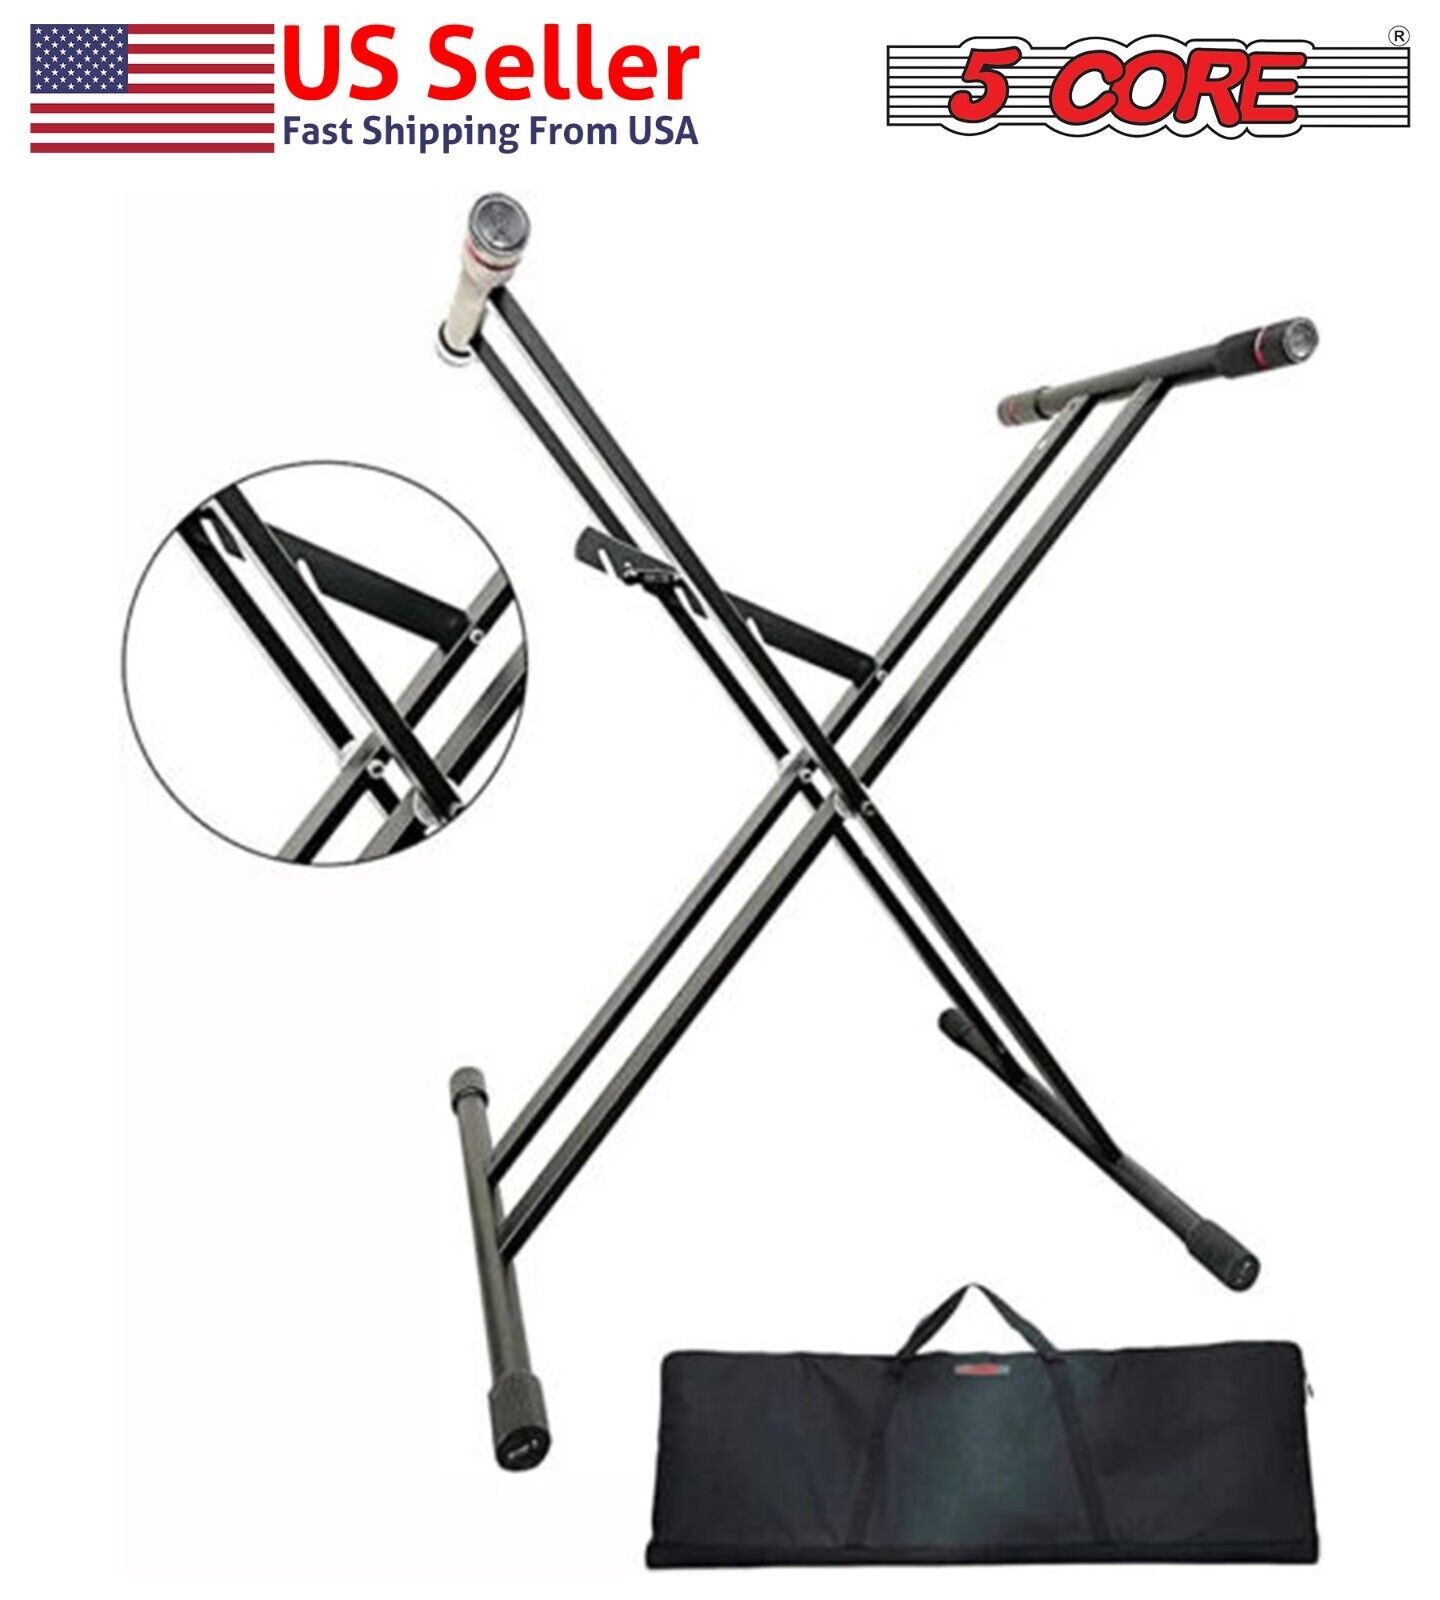 5Core Keyboard Stand Piano Riser Heavy Duty Double X w/ Bag Premium MIXER STAND - $30.99